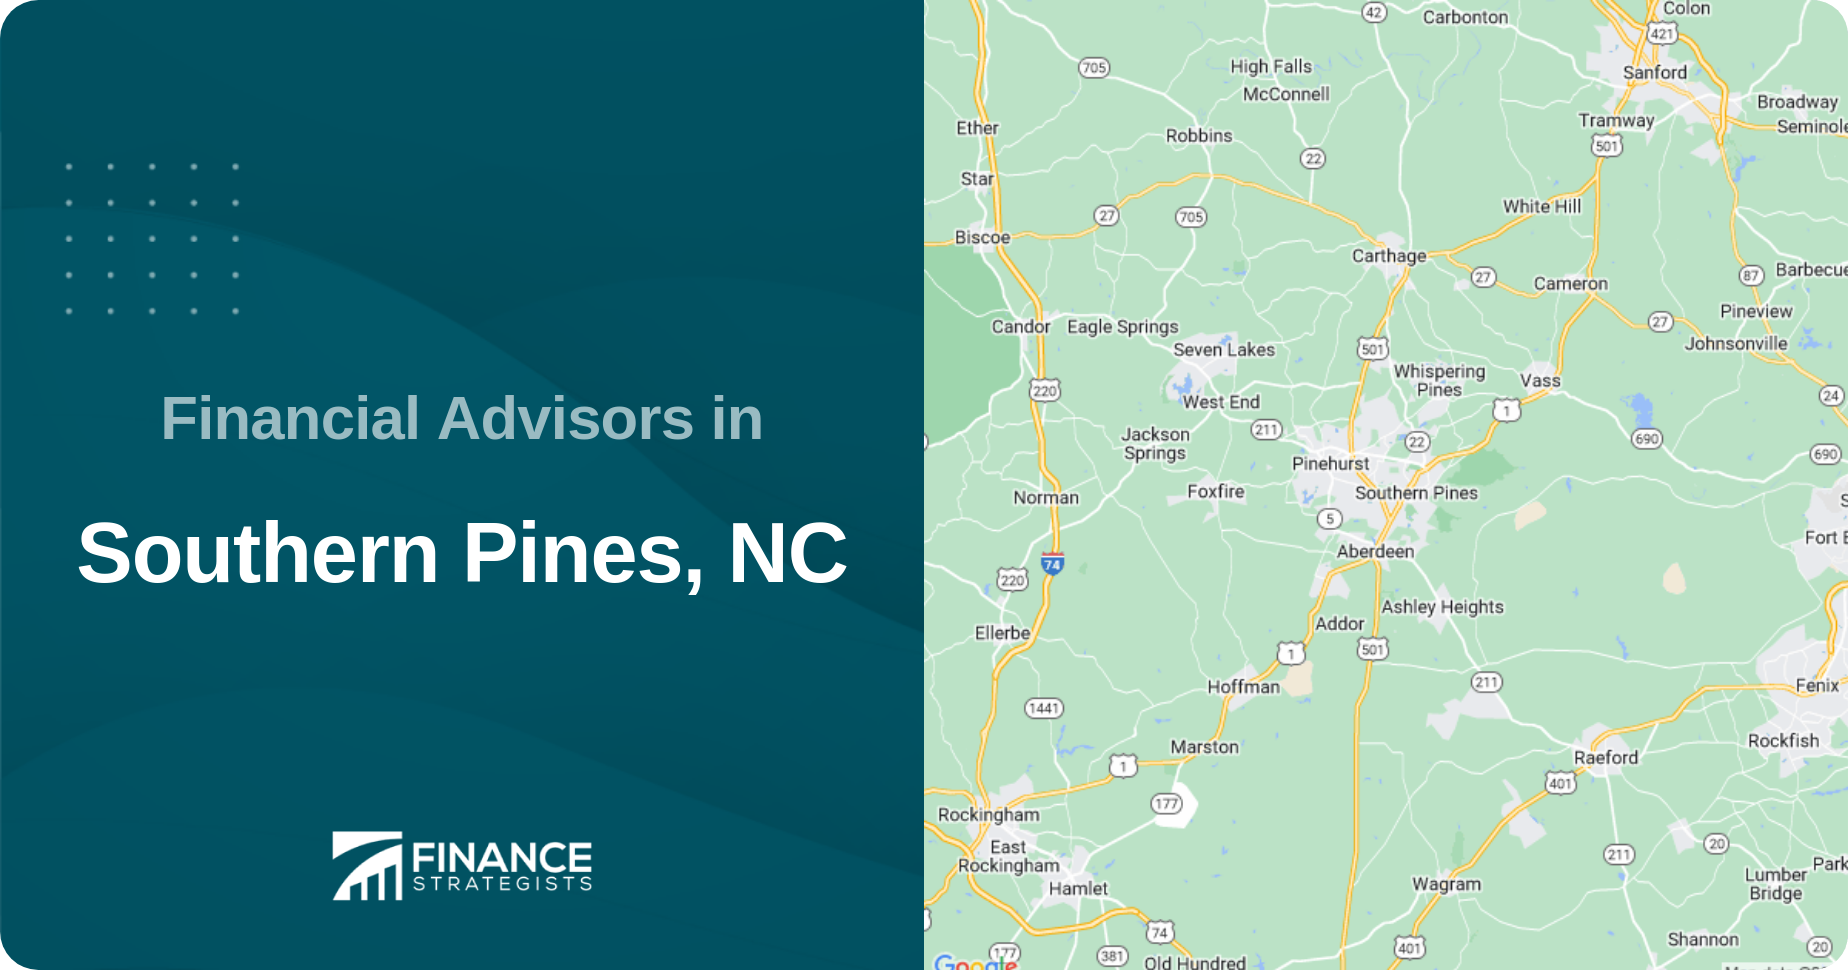 Financial Advisors in Southern Pines, NC